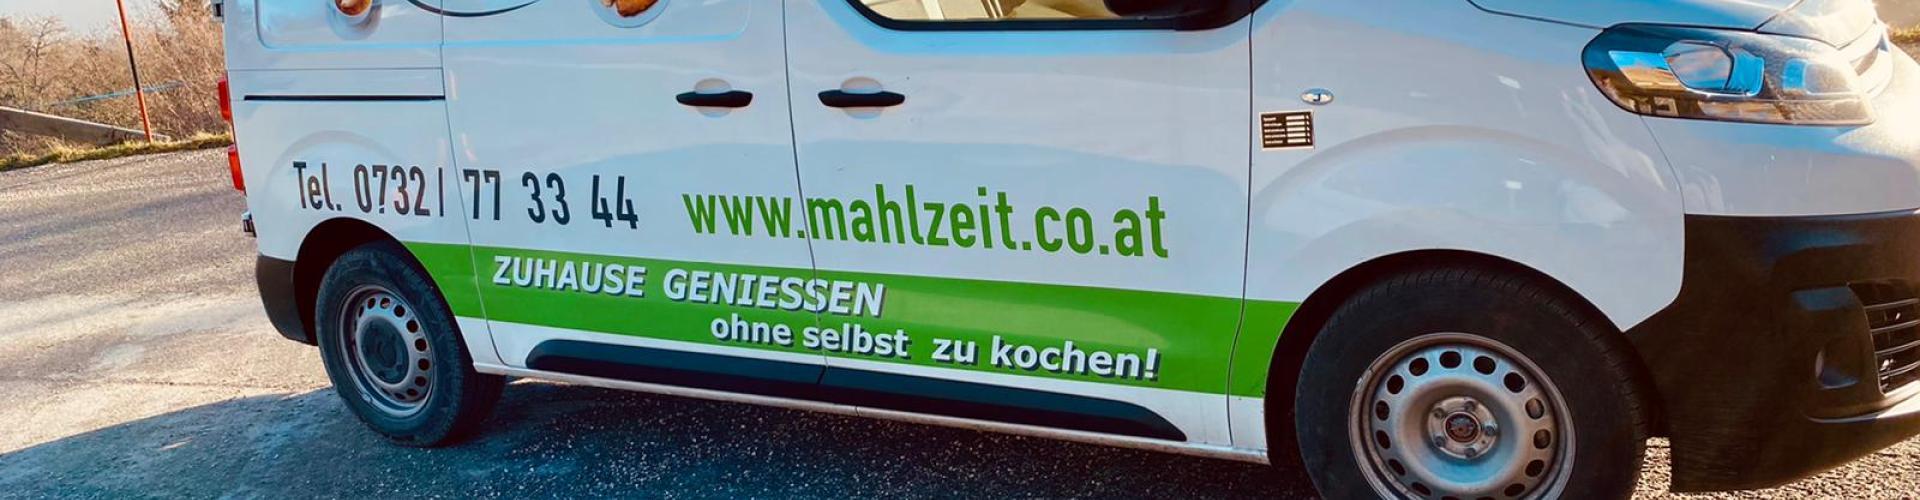 Mahlzeit Vertriebs GmbH cover